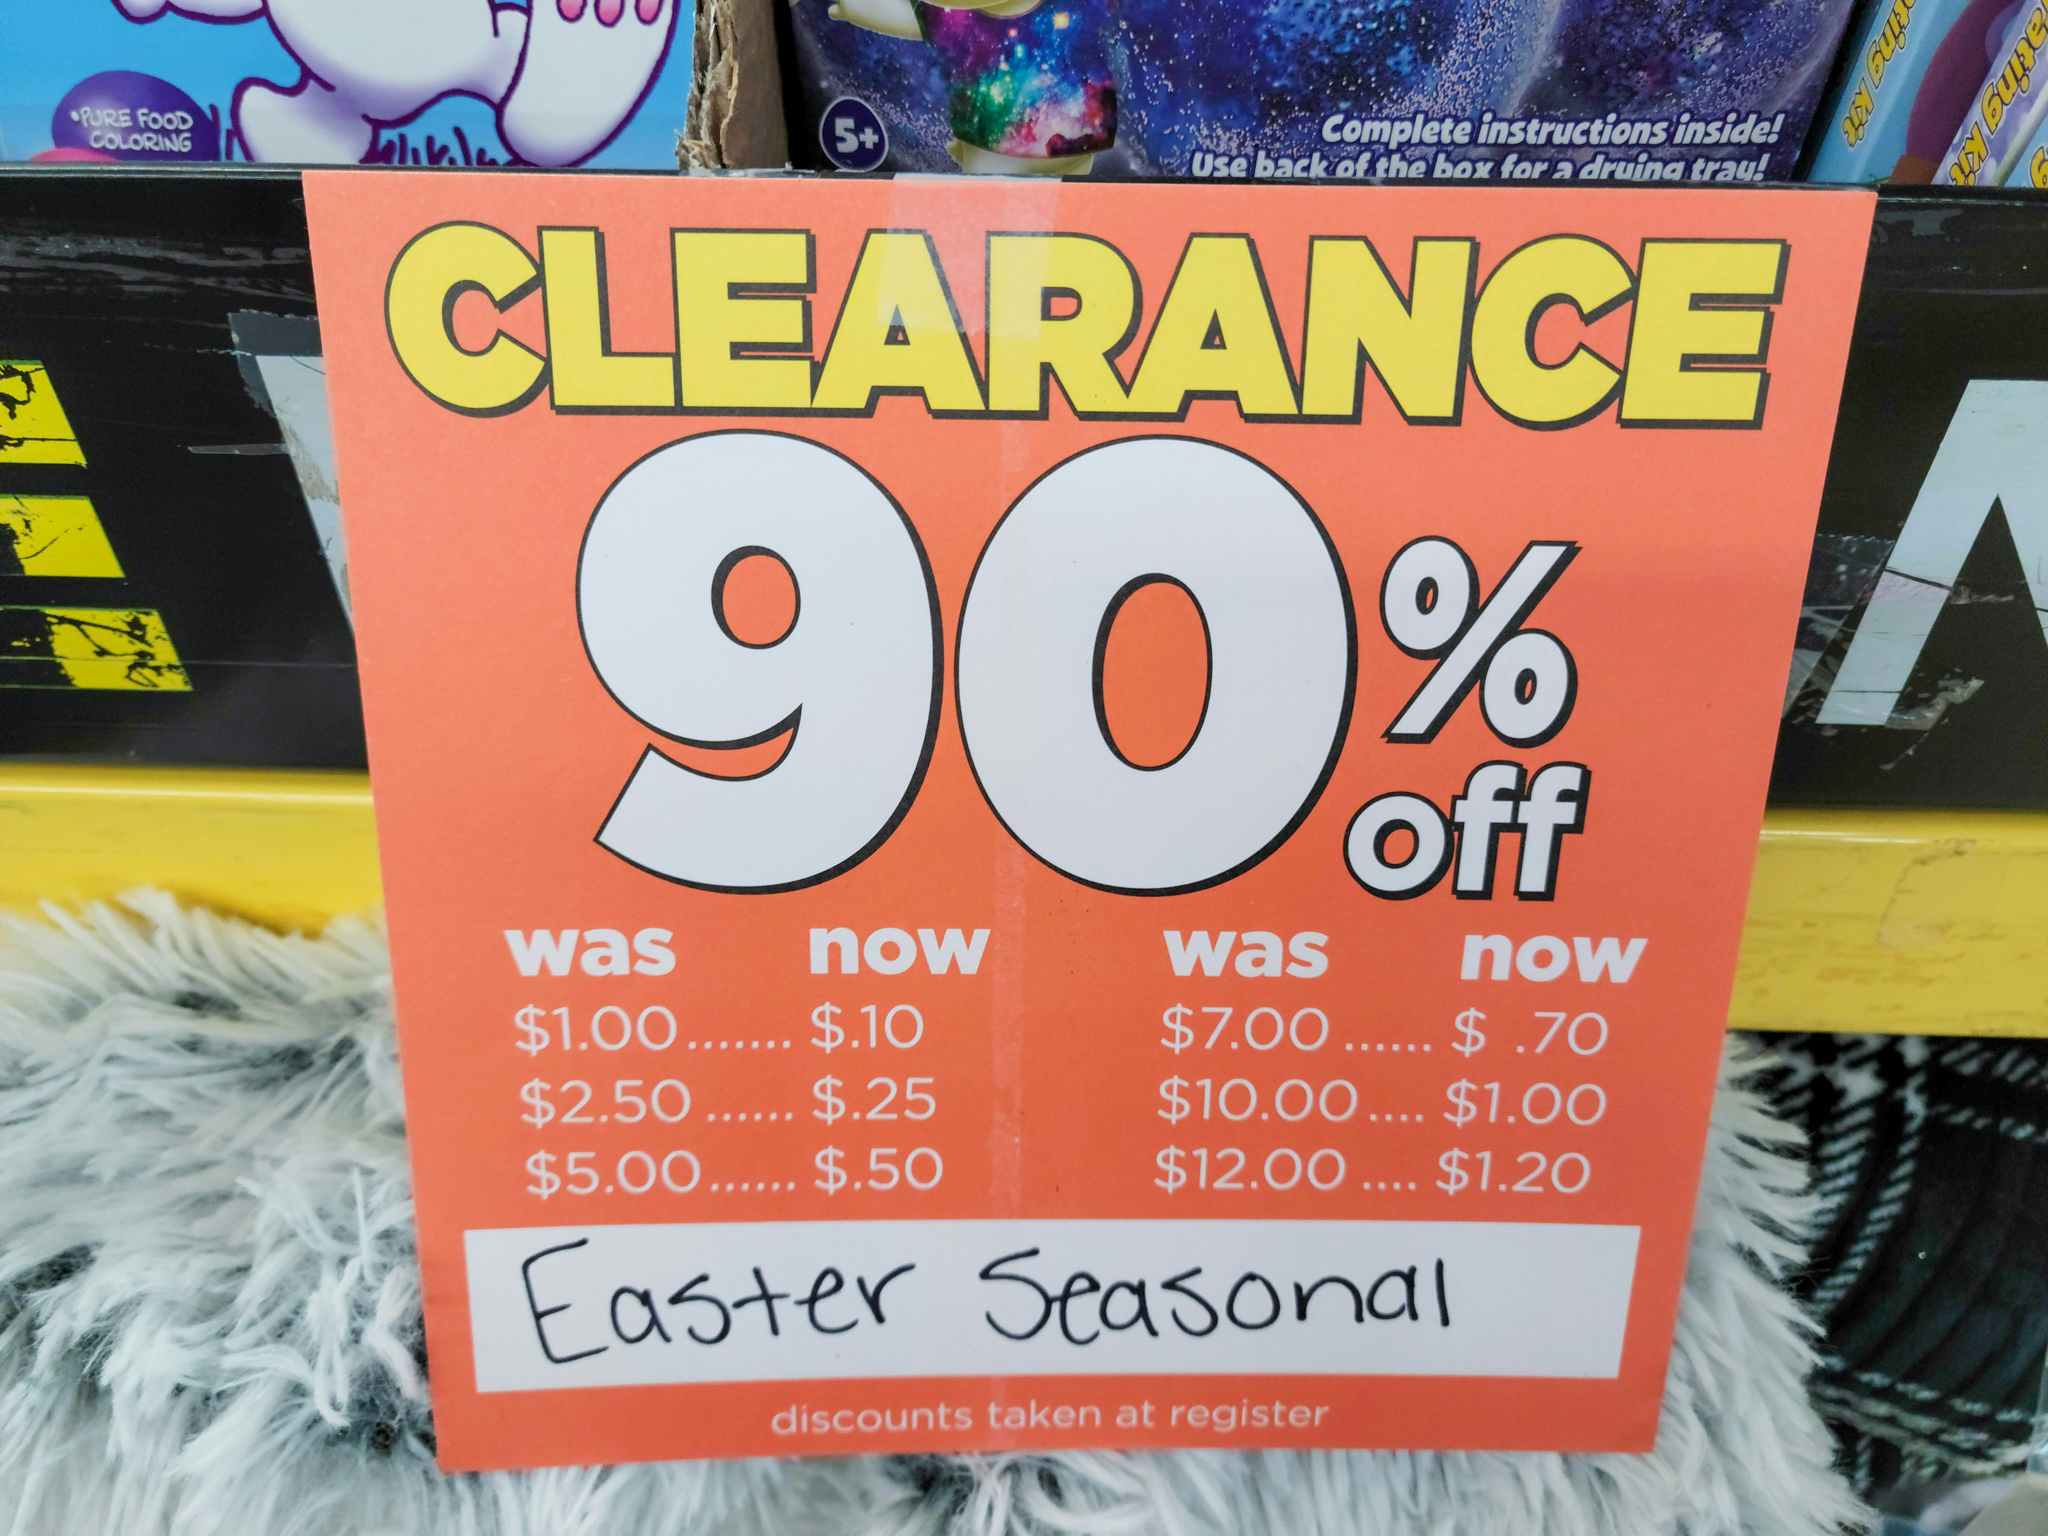 A sign for 90% off Easter Seasonal items at Dollar General